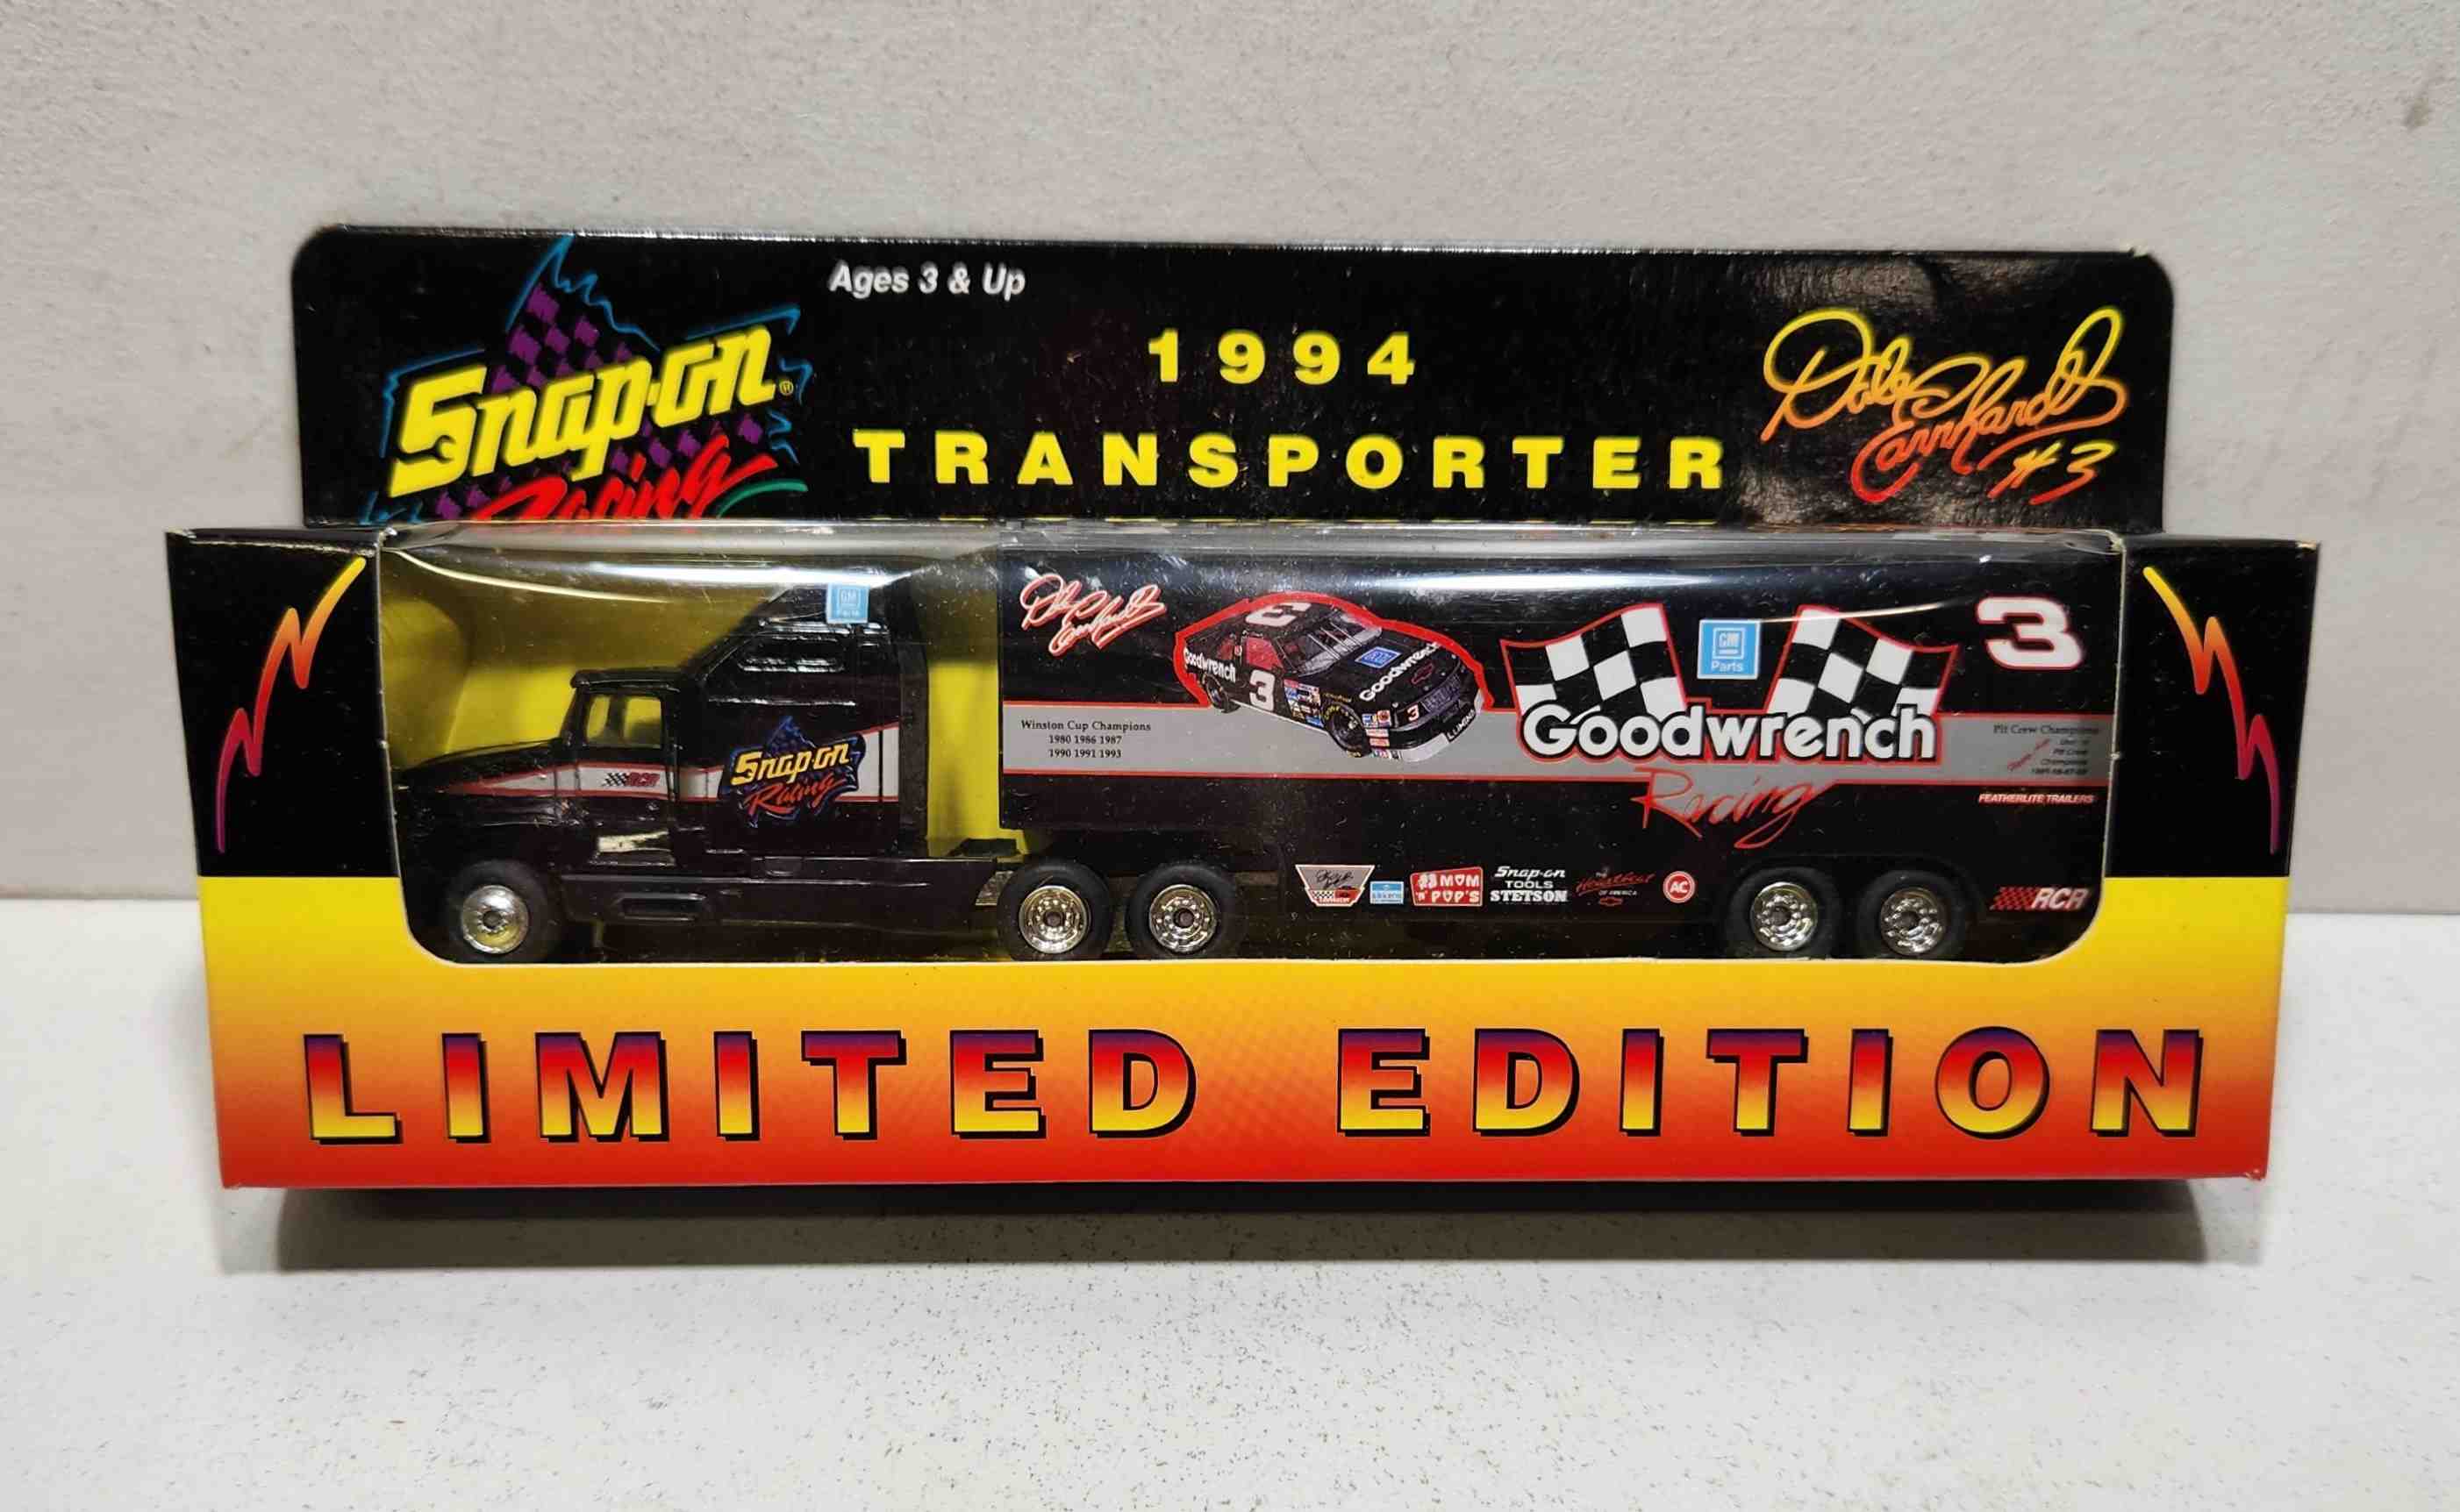 1994 Dale Earnhardt 1/80th Goodwrench "Snap-On" Transporter